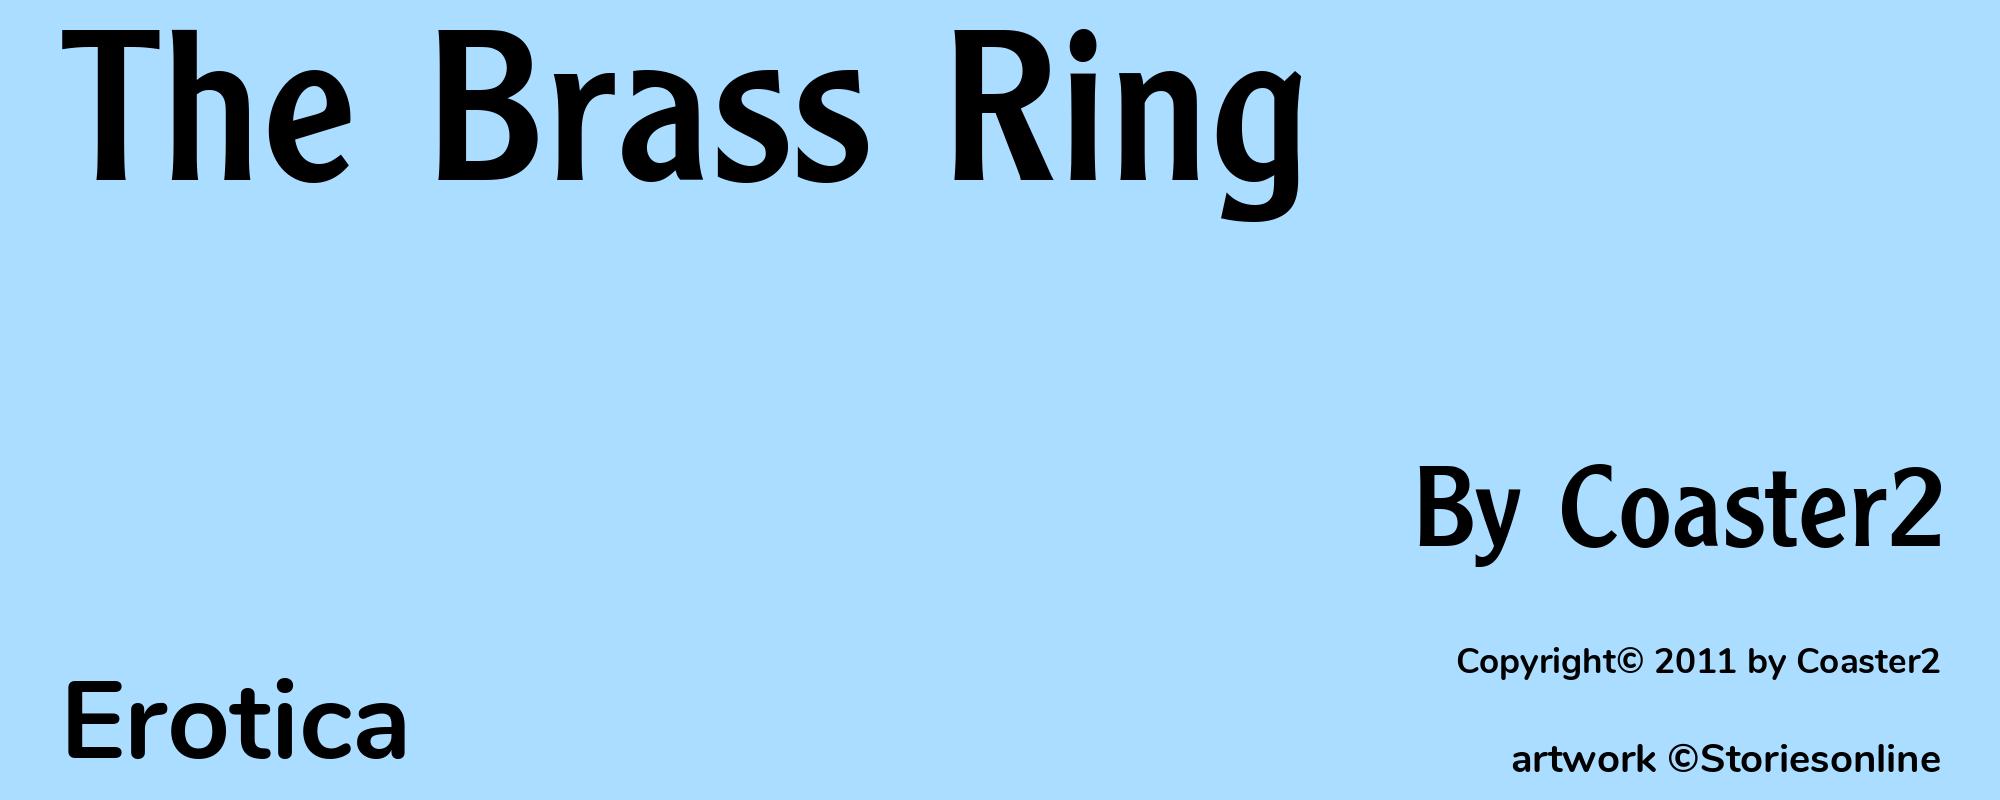 The Brass Ring - Cover